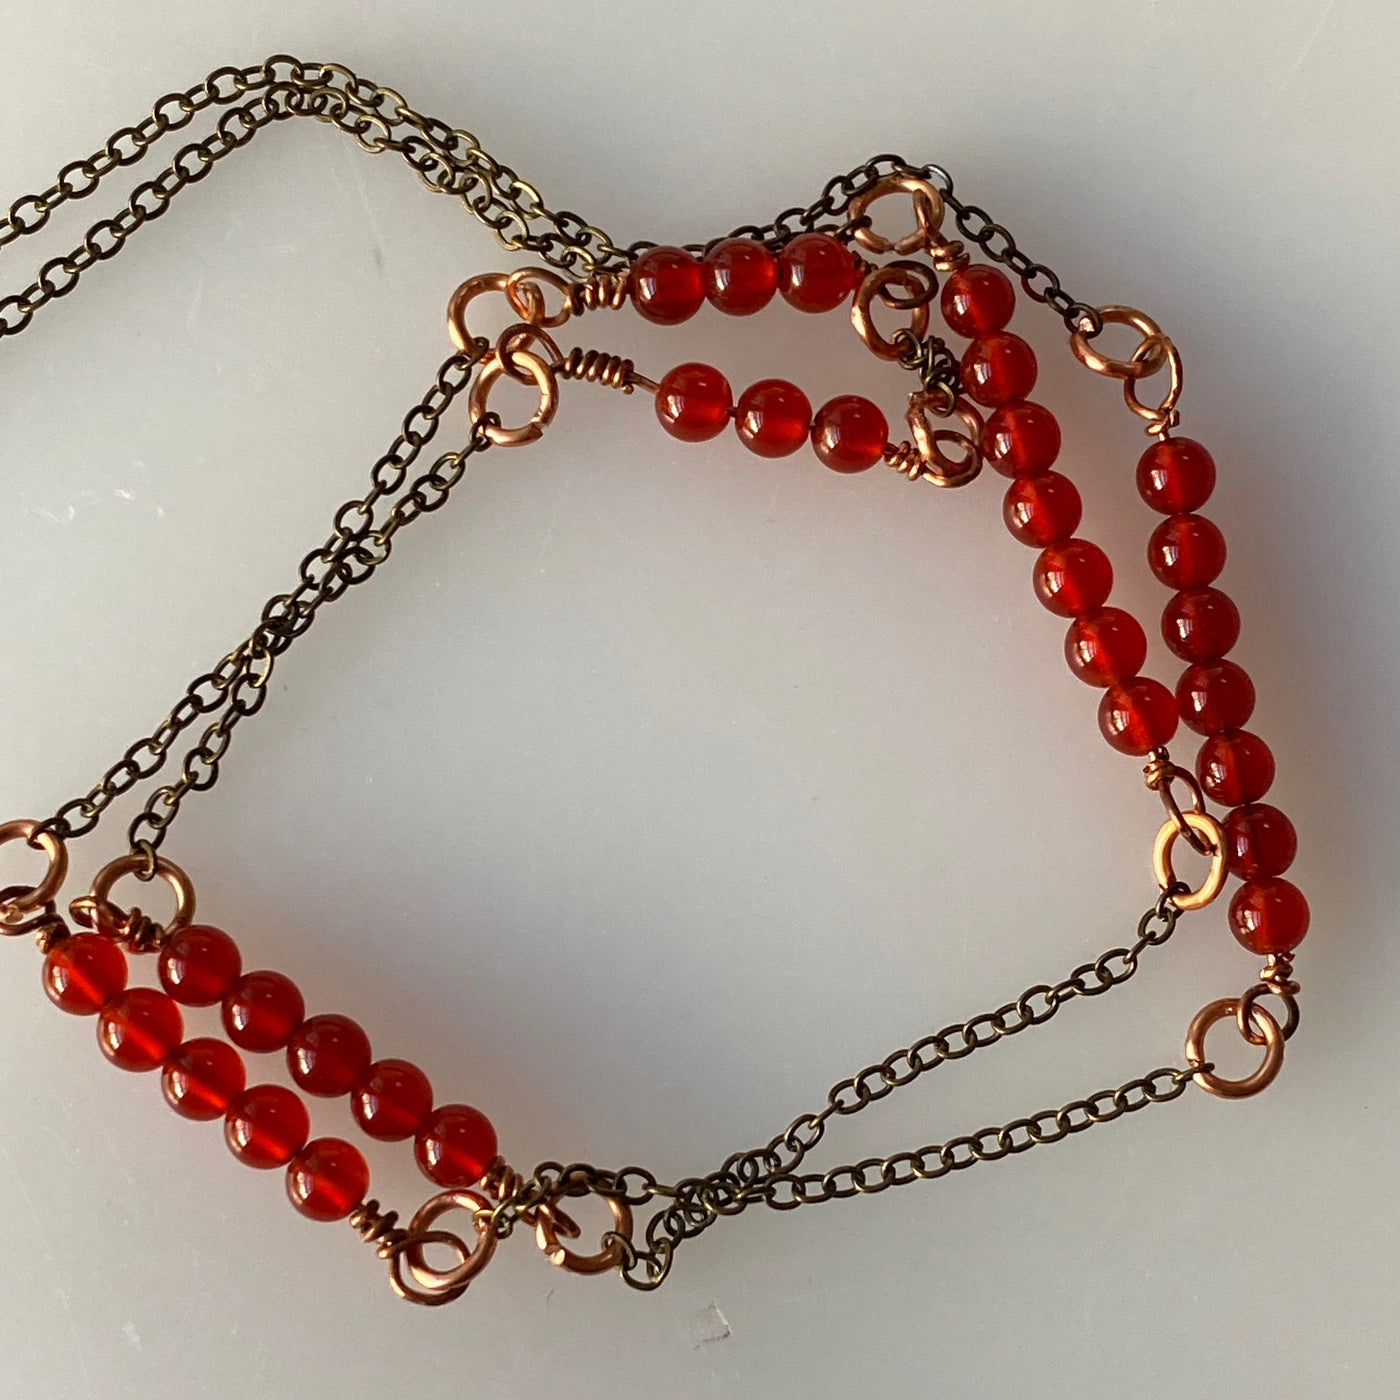 Carnelian on copper chain necklace. Lines collection for this long gorgeous necklace.